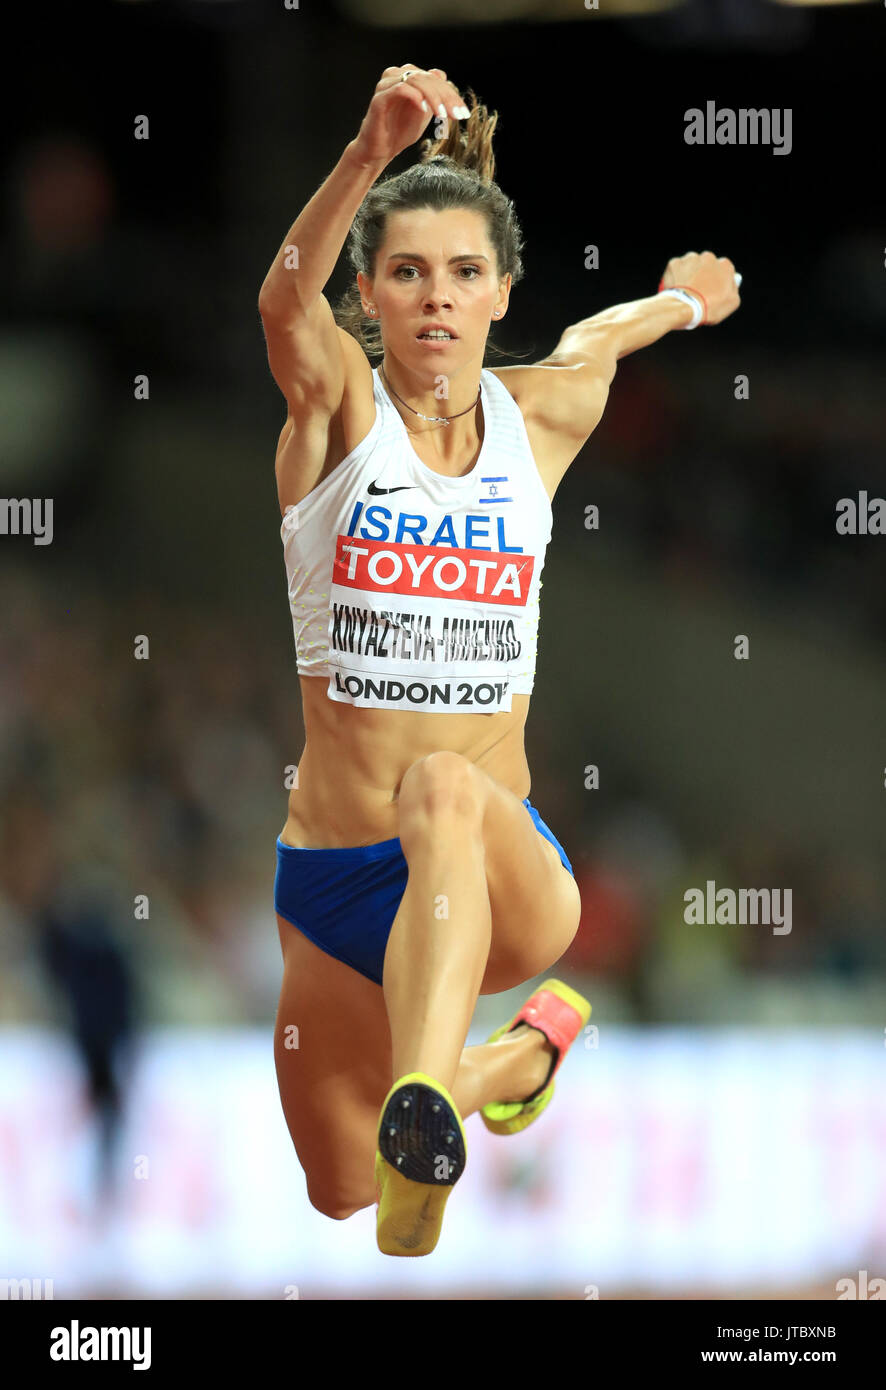 Israel's Hanna Knyazyeva-Minenko in action in the Women's Triple Jump Final  during day four of the 2017 IAAF World Championships at the London Stadium.  PRESS ASSOCIATION Photo. Picture date: Monday August 7,